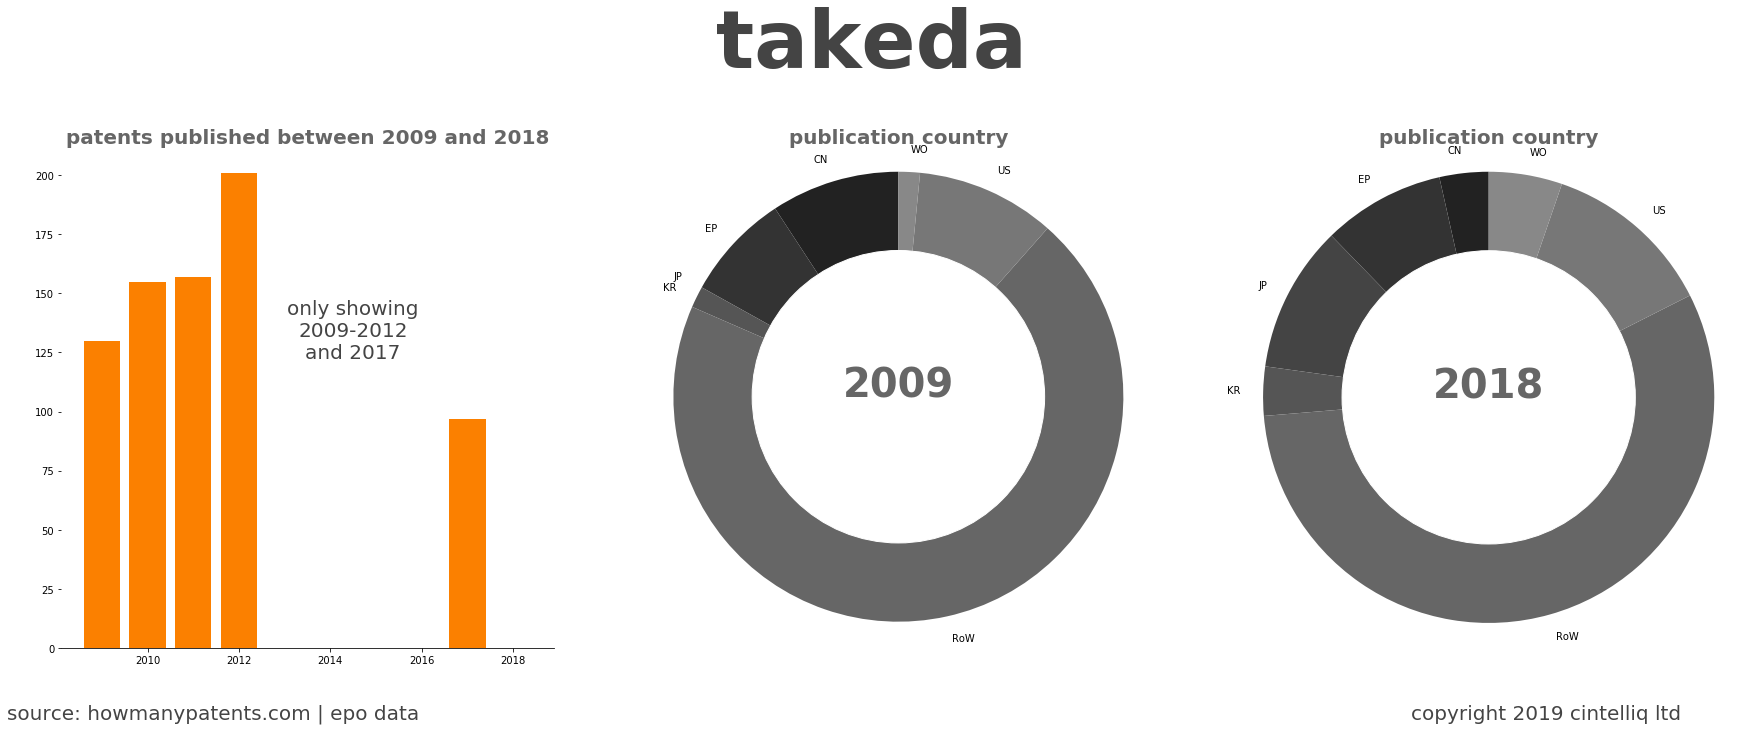 summary of patents for Takeda